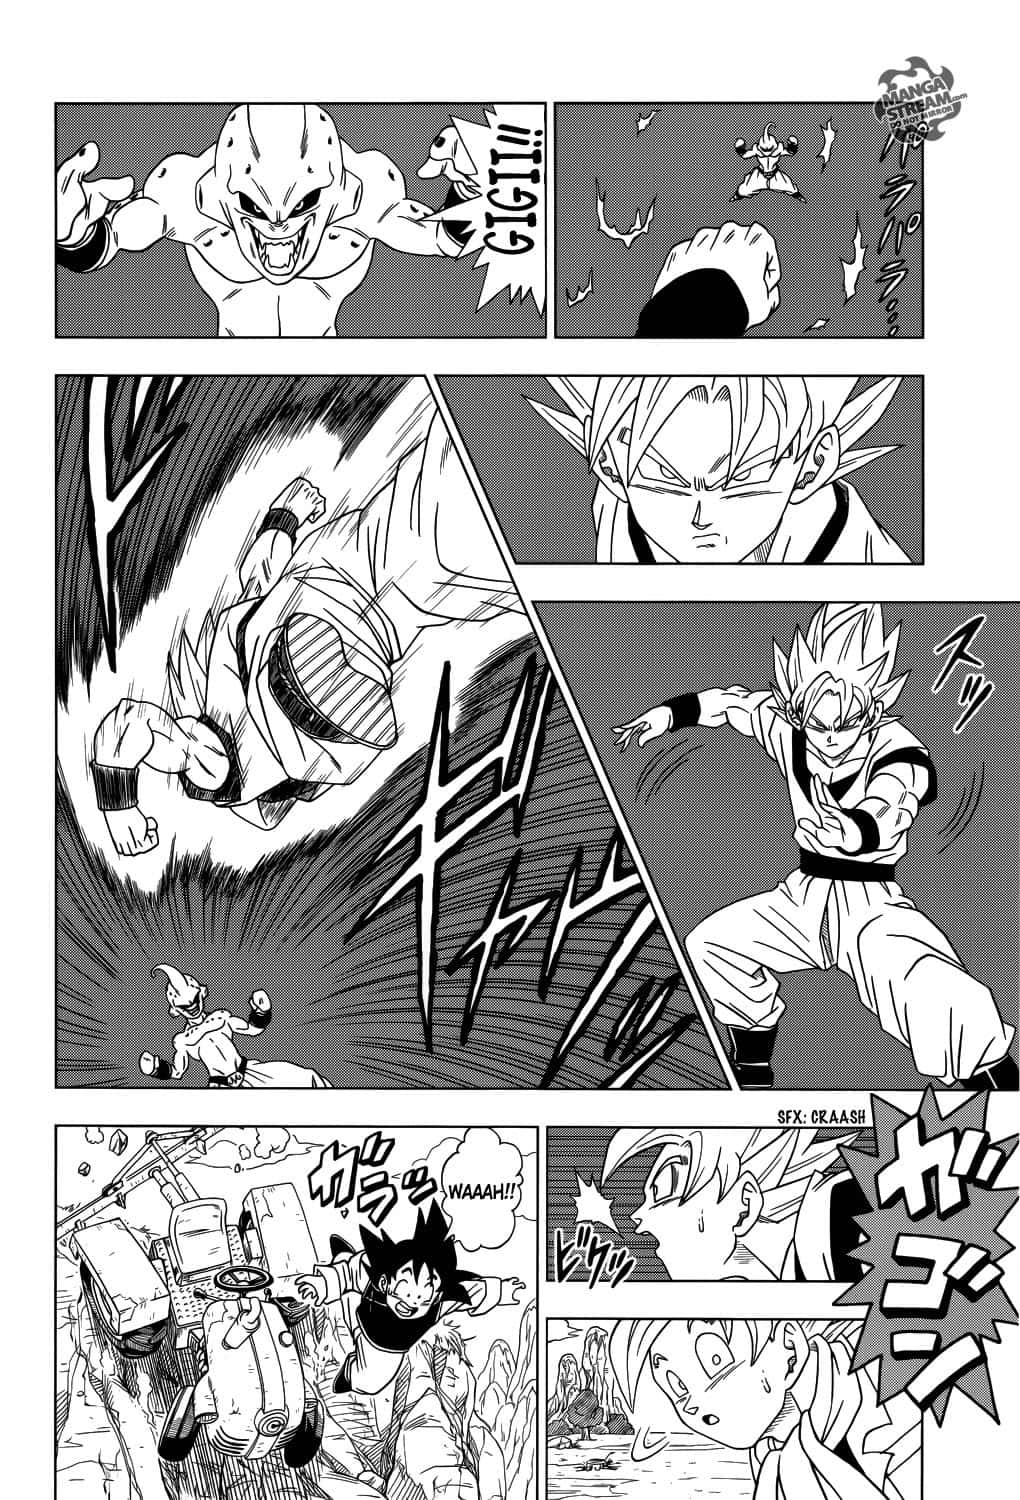 Mastering new levels of power with Vegeta and Goku in the Dragon Ball Super Manga! Wallpaper